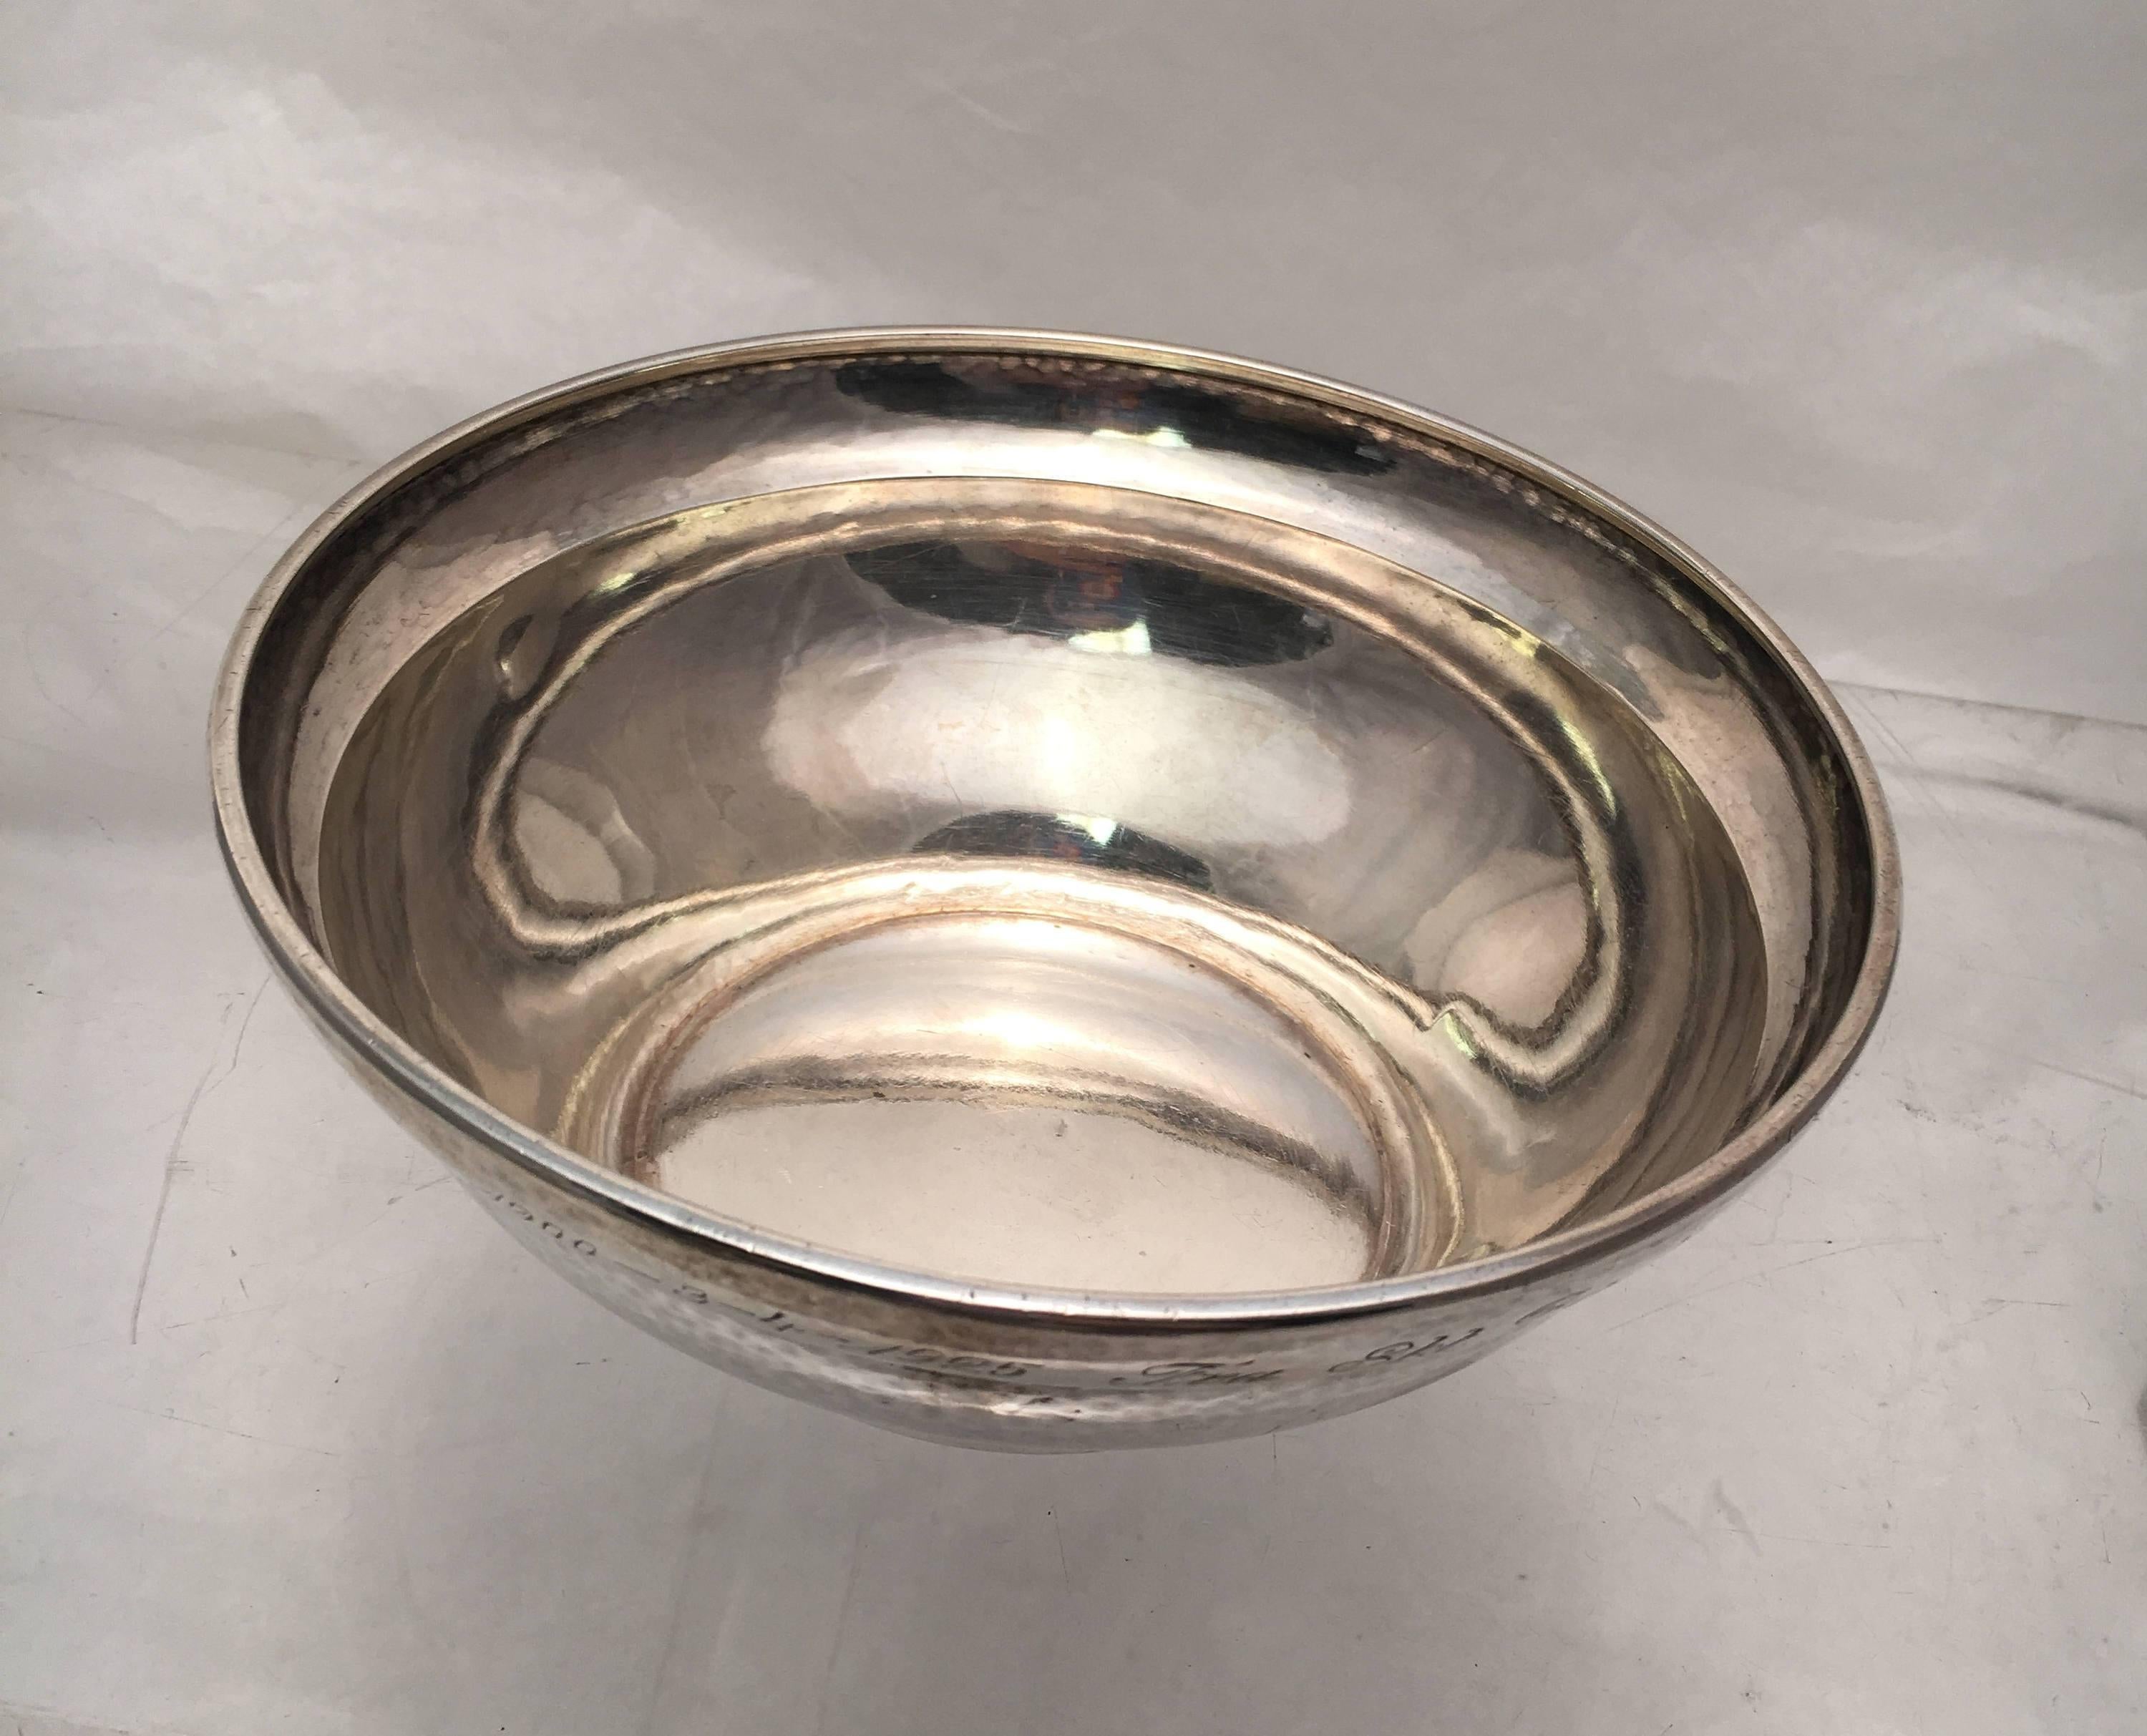 Danish Georg Jensen Early 20th Century Hand Hammered Sterling Silver Serving Bowl #416 For Sale